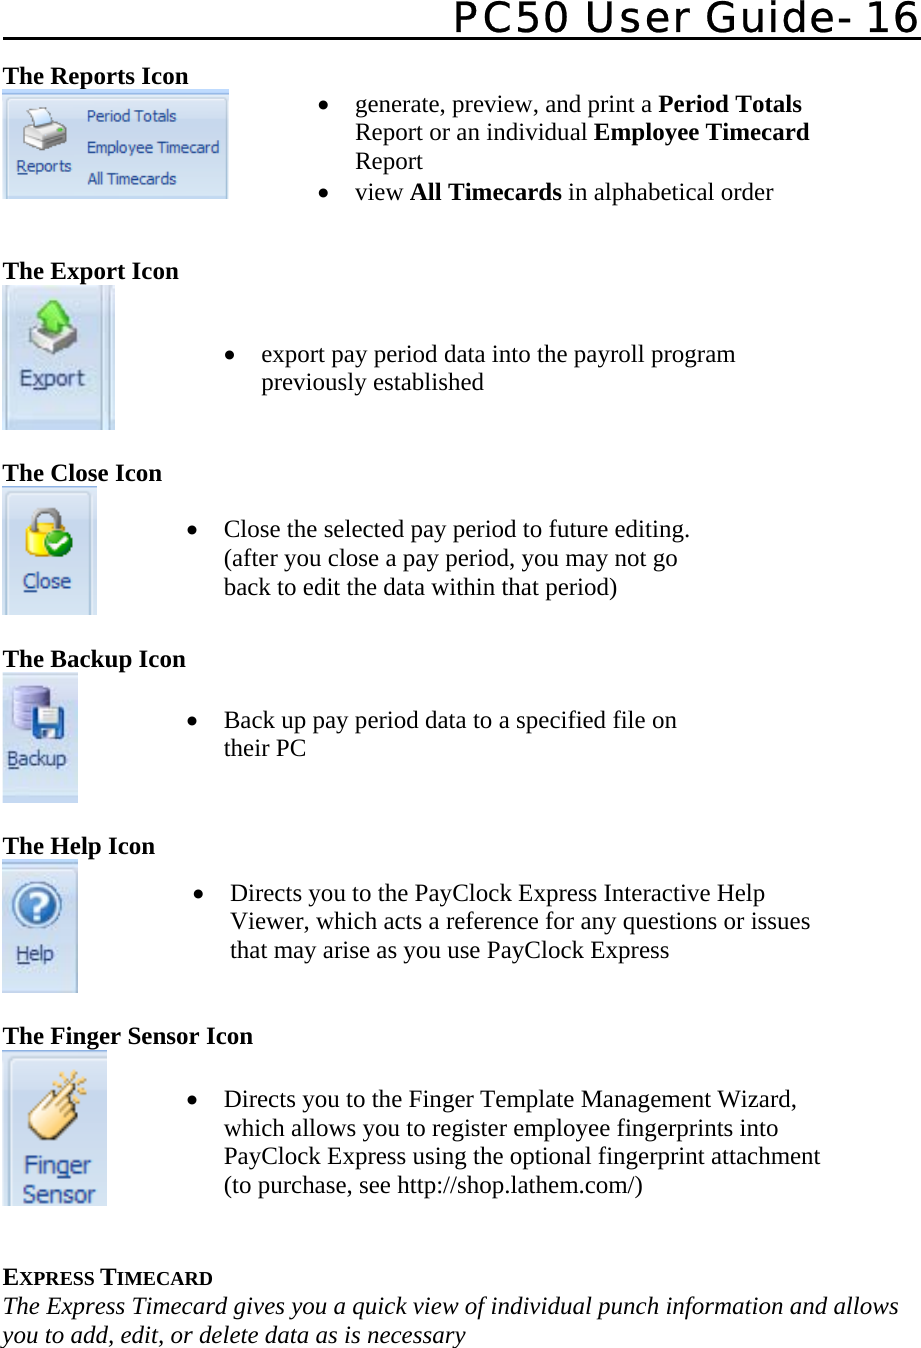   PC50 User Guide- 16   The Reports Icon    The Export Icon  The Close Icon     The Backup Icon   The Help Icon   The Finger Sensor Icon    EXPRESS TIMECARD The Express Timecard gives you a quick view of individual punch information and allows you to add, edit, or delete data as is necessary  • generate, preview, and print a Period Totals Report or an individual Employee Timecard Report • view All Timecards in alphabetical order   • export pay period data into the payroll program previously established   • Close the selected pay period to future editing.  (after you close a pay period, you may not go back to edit the data within that period) • Back up pay period data to a specified file on their PC  • Directs you to the Finger Template Management Wizard, which allows you to register employee fingerprints into PayClock Express using the optional fingerprint attachment (to purchase, see http://shop.lathem.com/)• Directs you to the PayClock Express Interactive Help Viewer, which acts a reference for any questions or issues that may arise as you use PayClock Express  